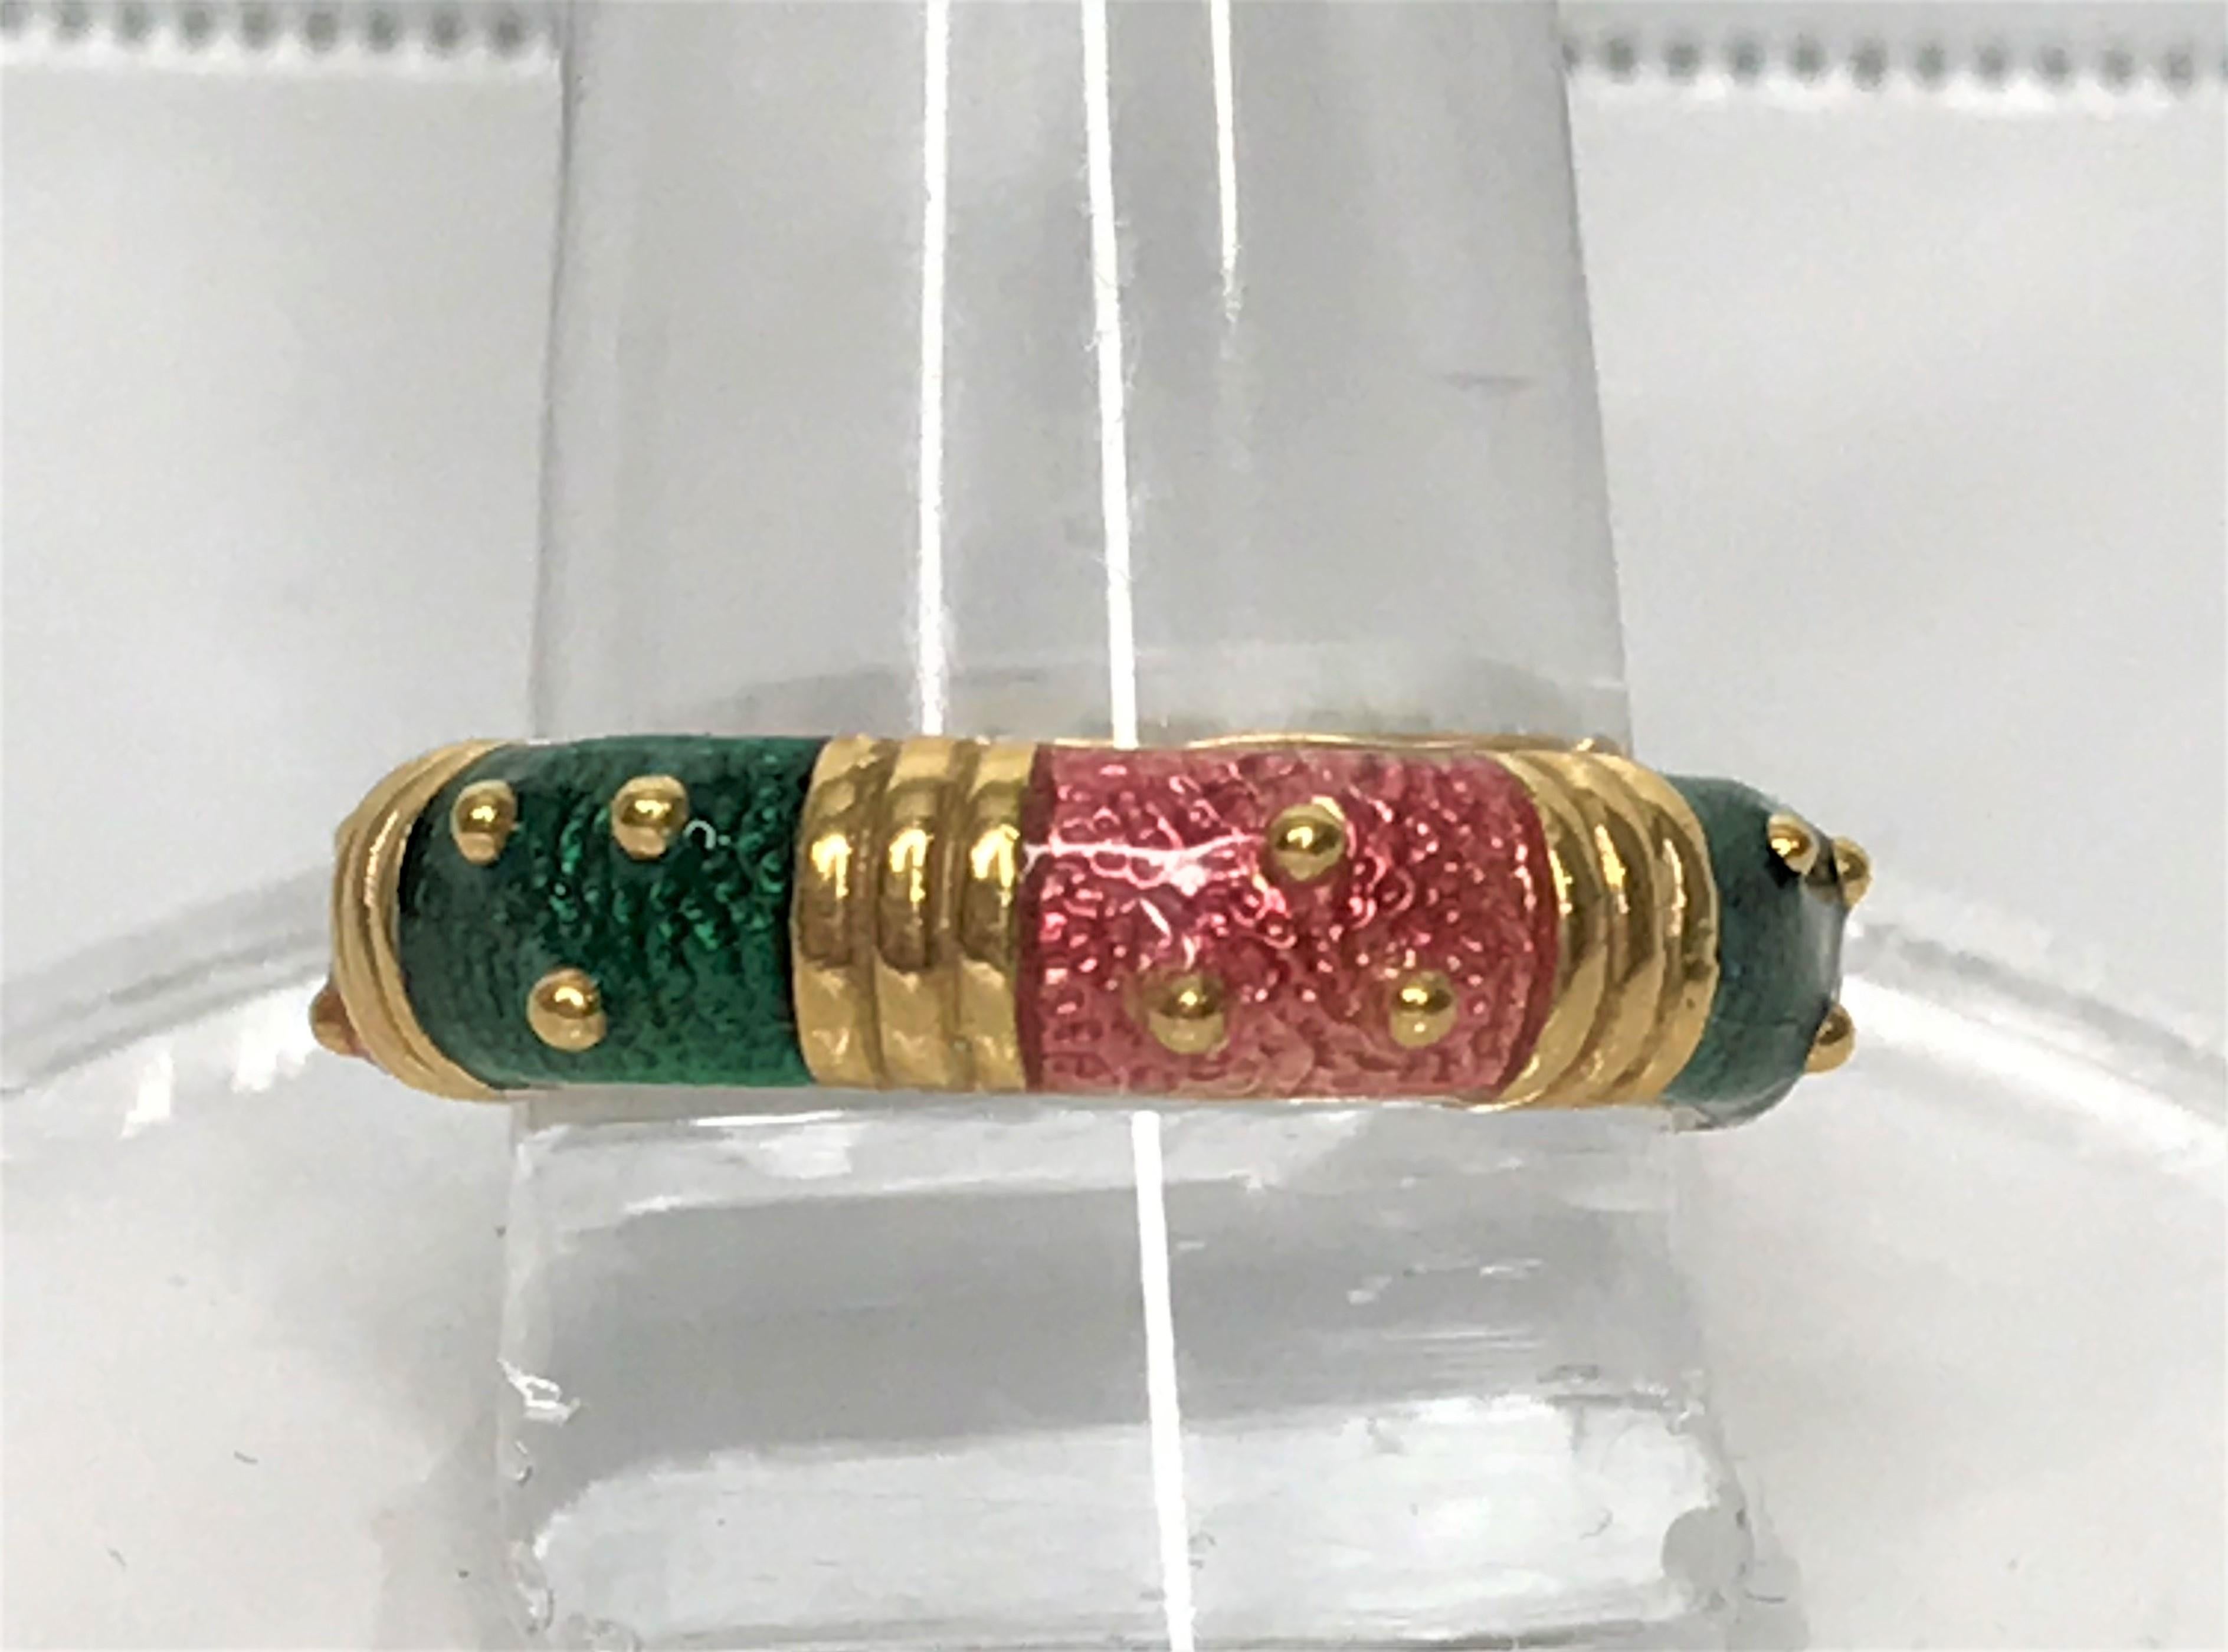 By designer Hidalgo Jewelry, this beautiful pink and green ring combination is a rare find.
18 karat yellow gold.
Alternating pink and green enamel with gold accents in between.
Approximately 5mm wide, overall.
Stamped 